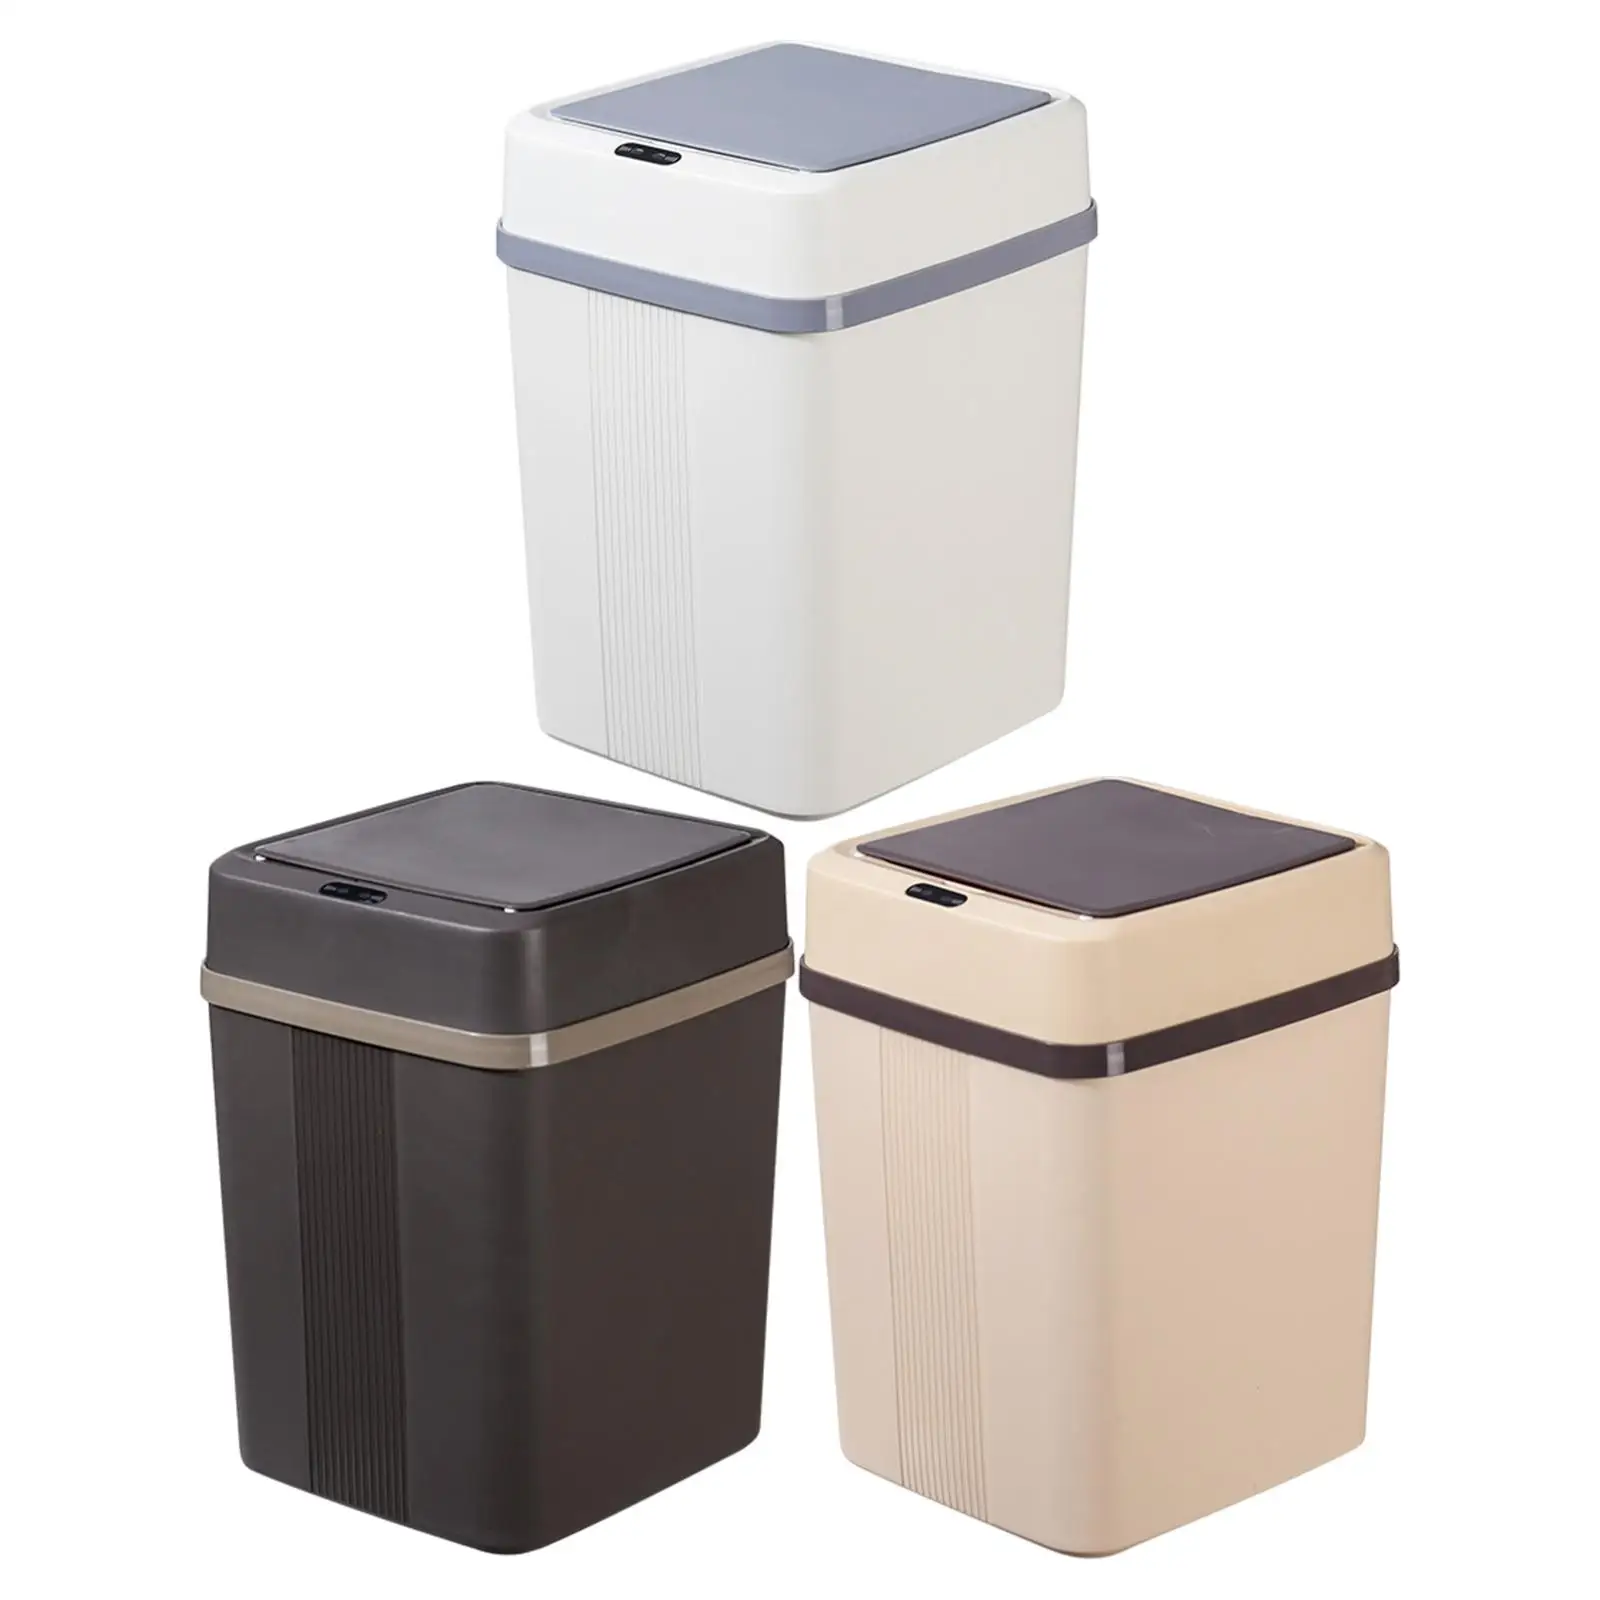 Intelligent Trash Can Waterproof Cleaning Creative Automatic Sensor Plastic Dustbin for Toilet Bathroom Kitchen Household Home